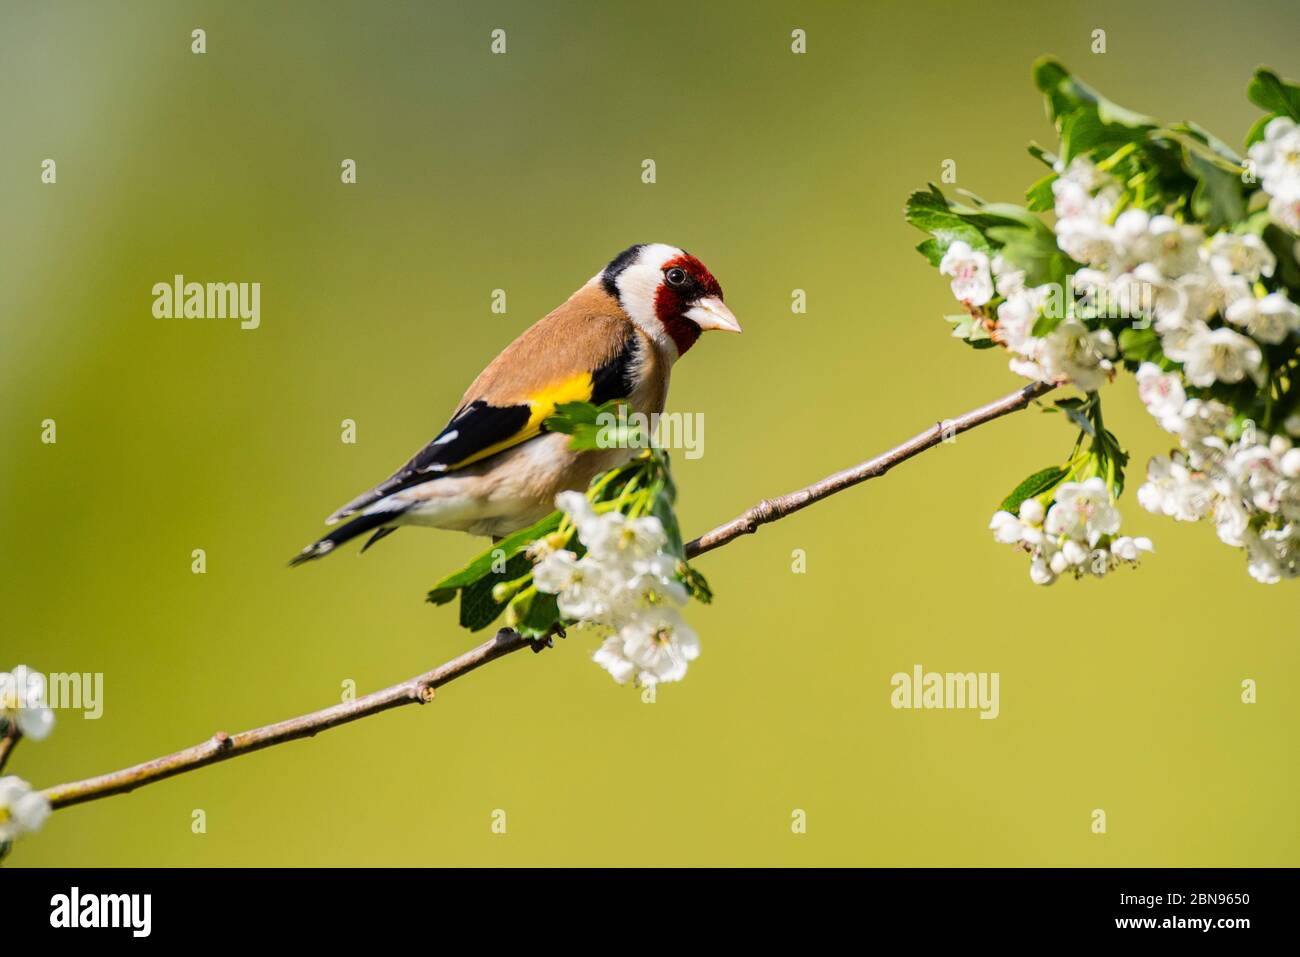 A Goldfinch (Carduelis carduelis) in the Uk Stock Photo